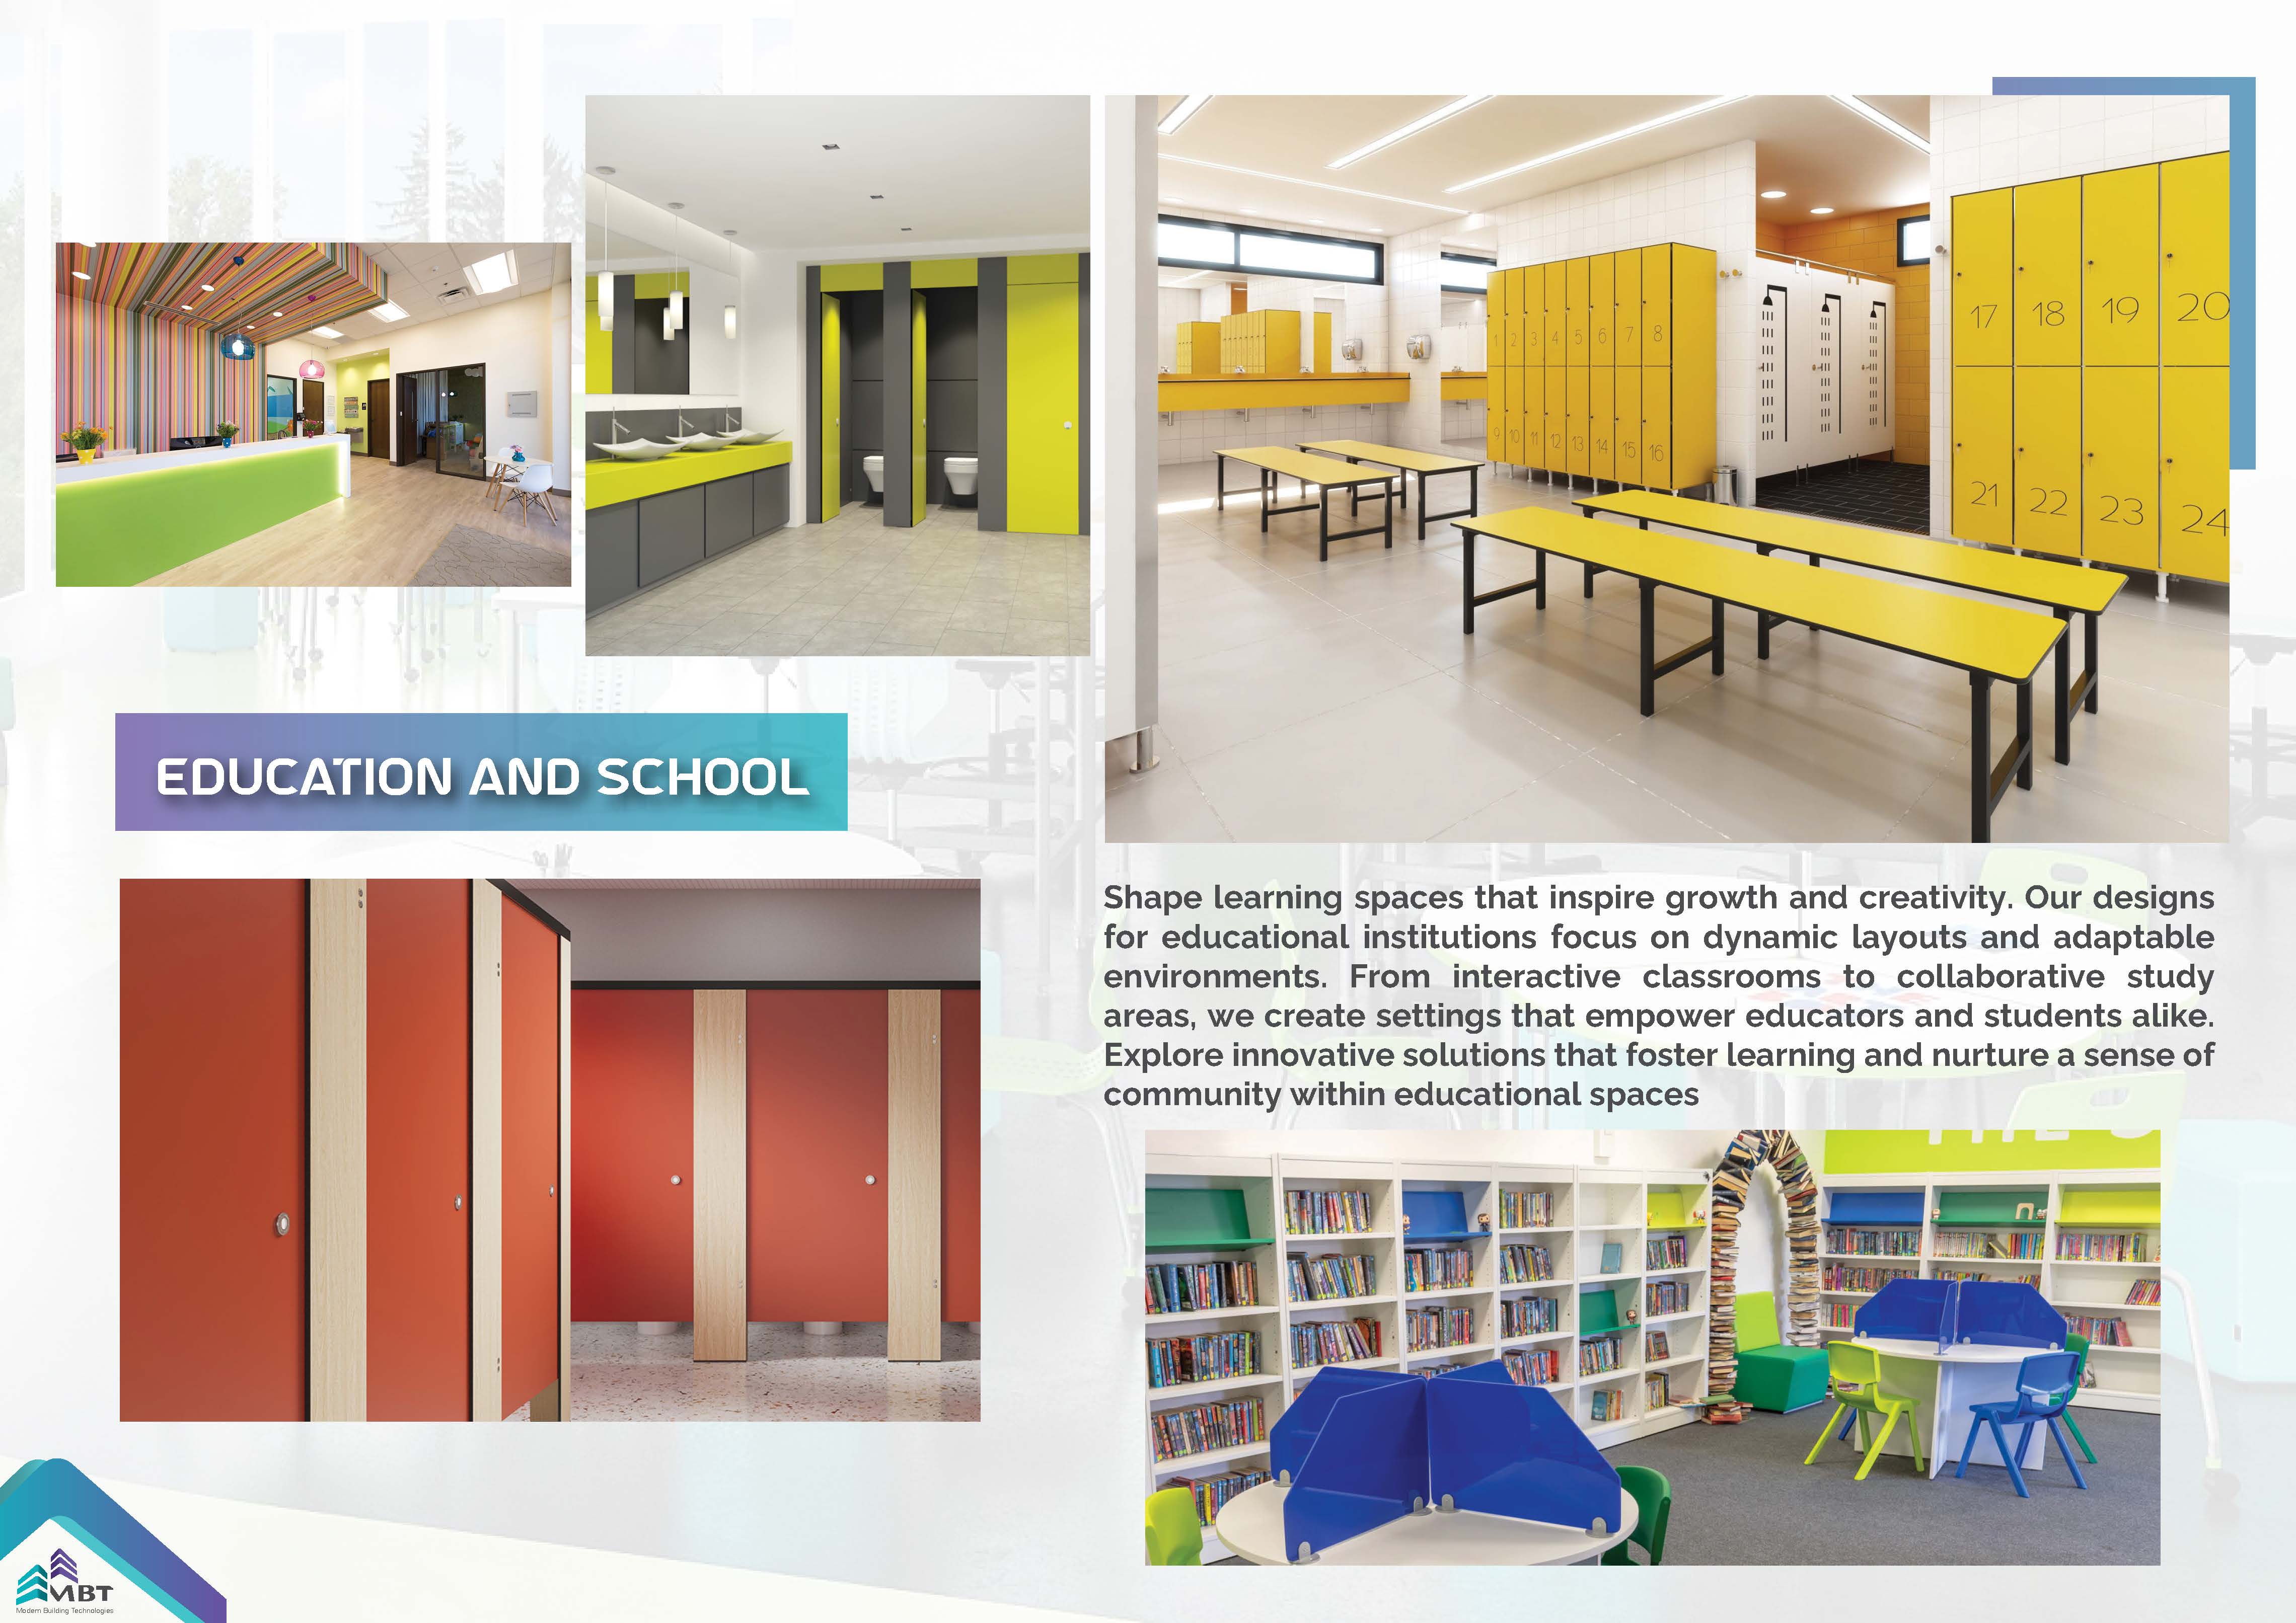 mbt fit out commercial education and school